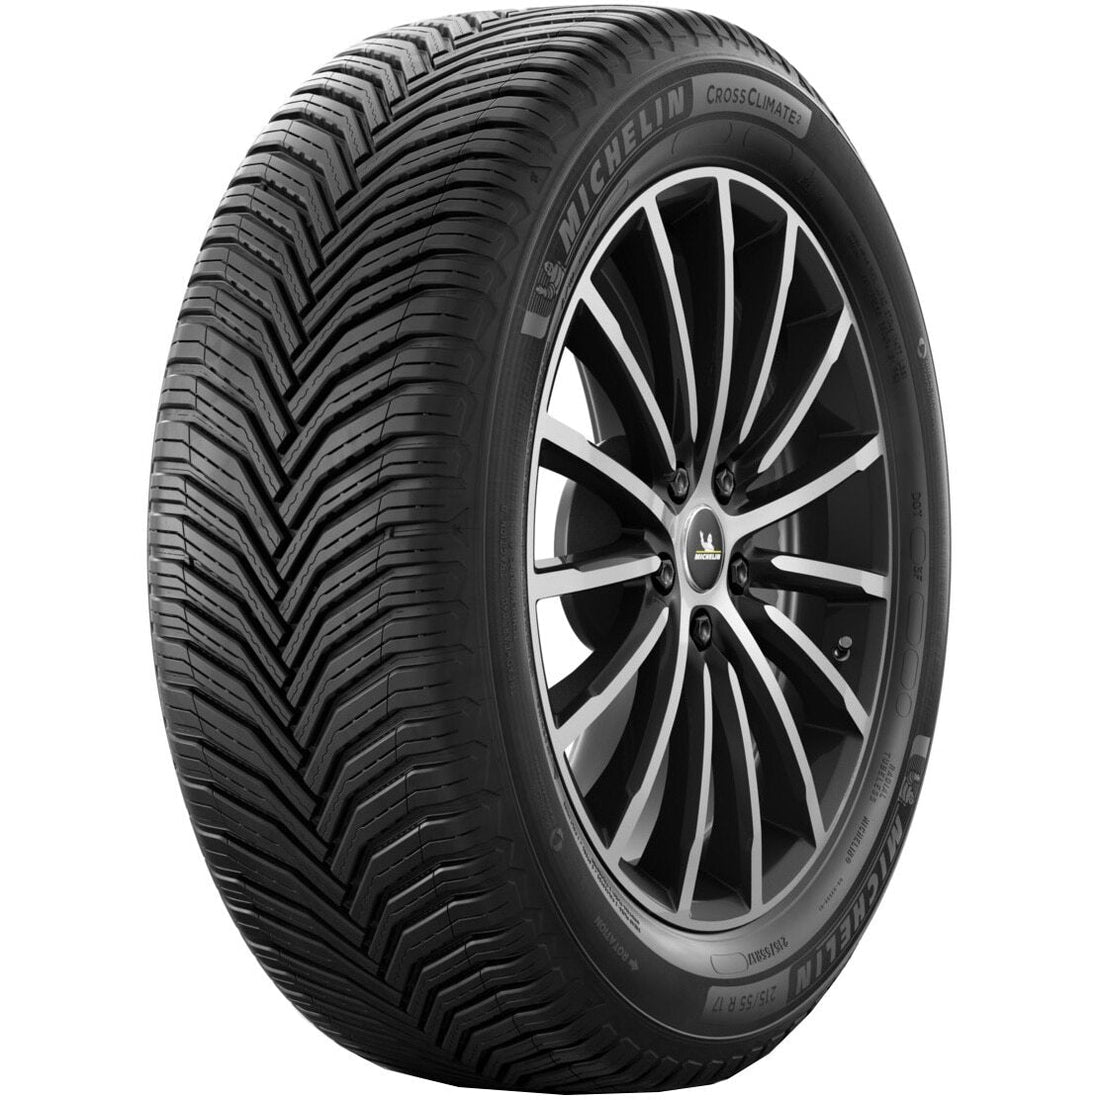 Anvelope All-season Michelin Crossclimate 2 225/50R17 98Y Anvelux